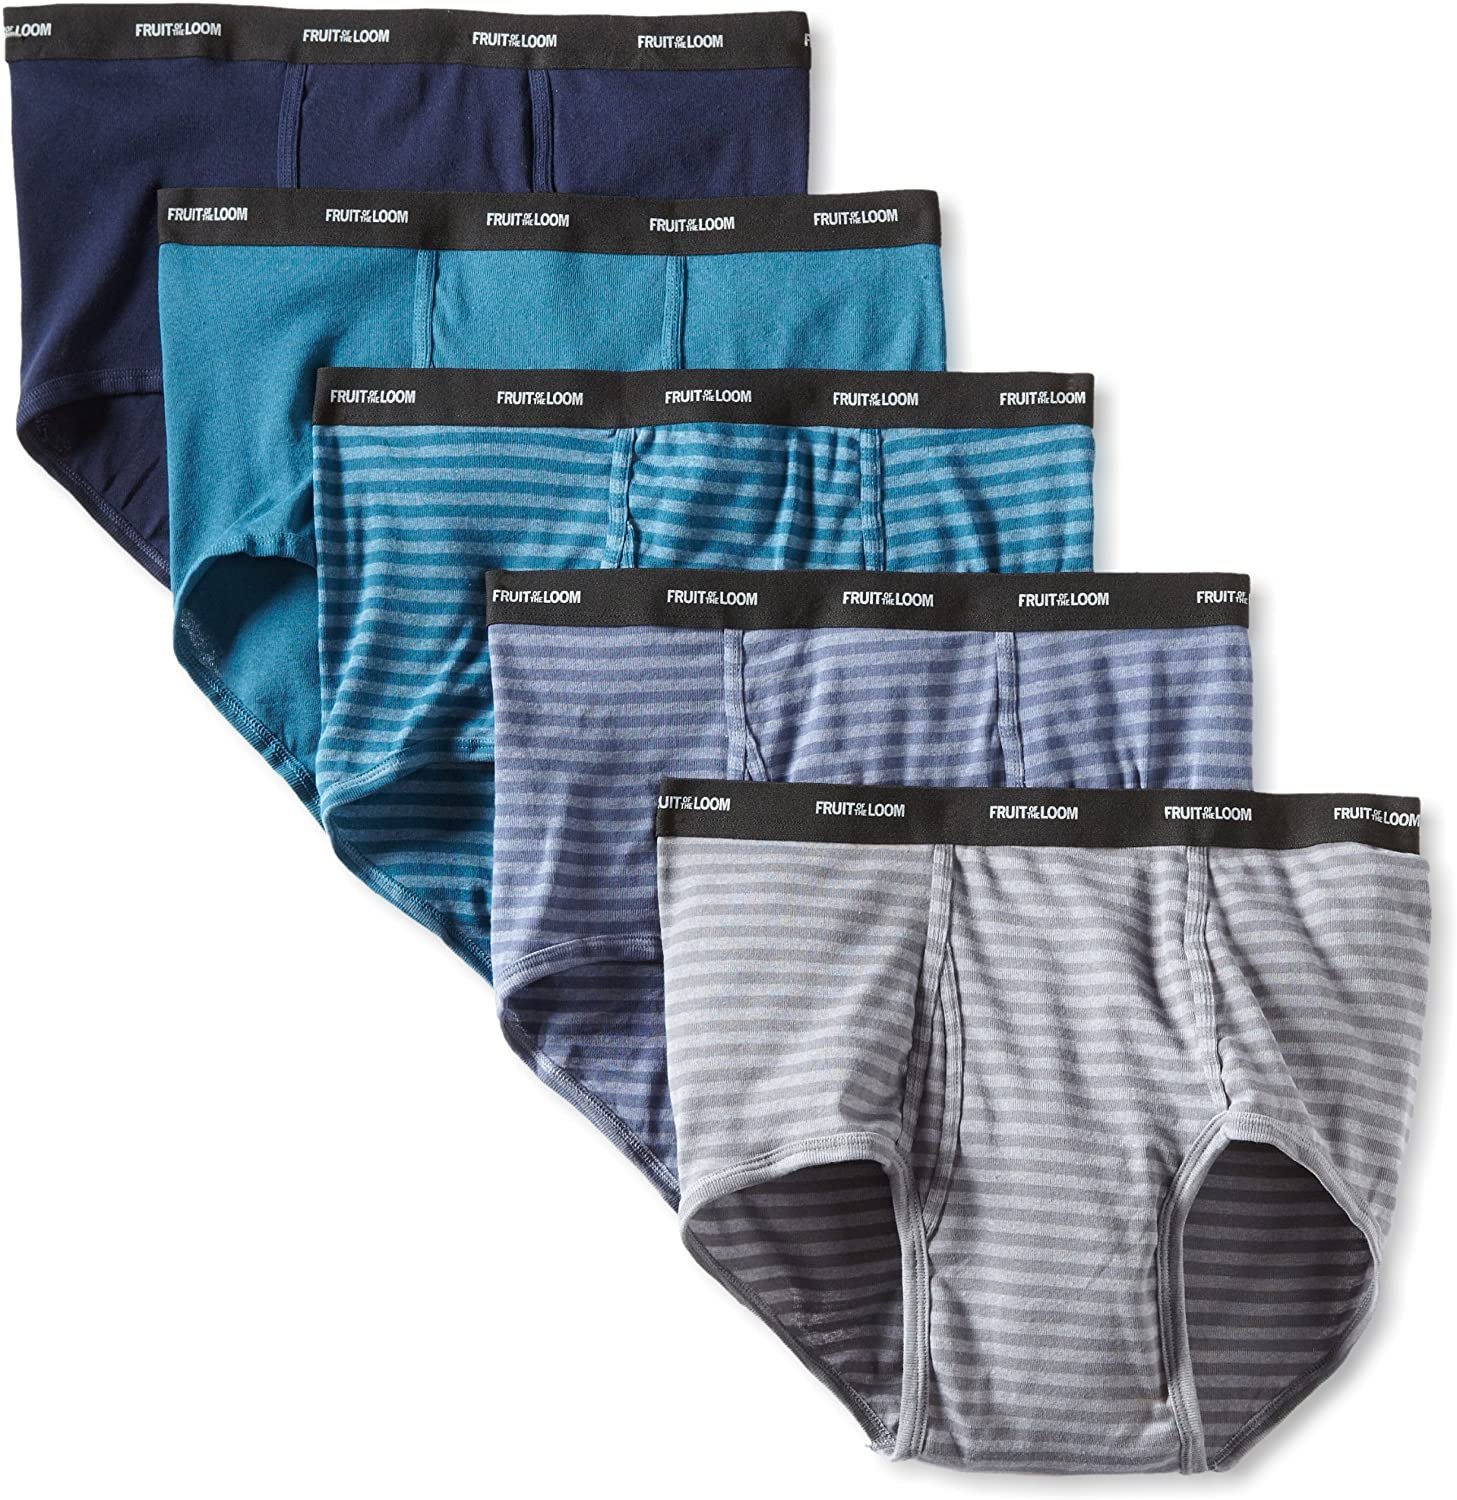 Fruit of the Loom Men's Fashion Briefs Size 3X Stripe Solid (Pack of Five)